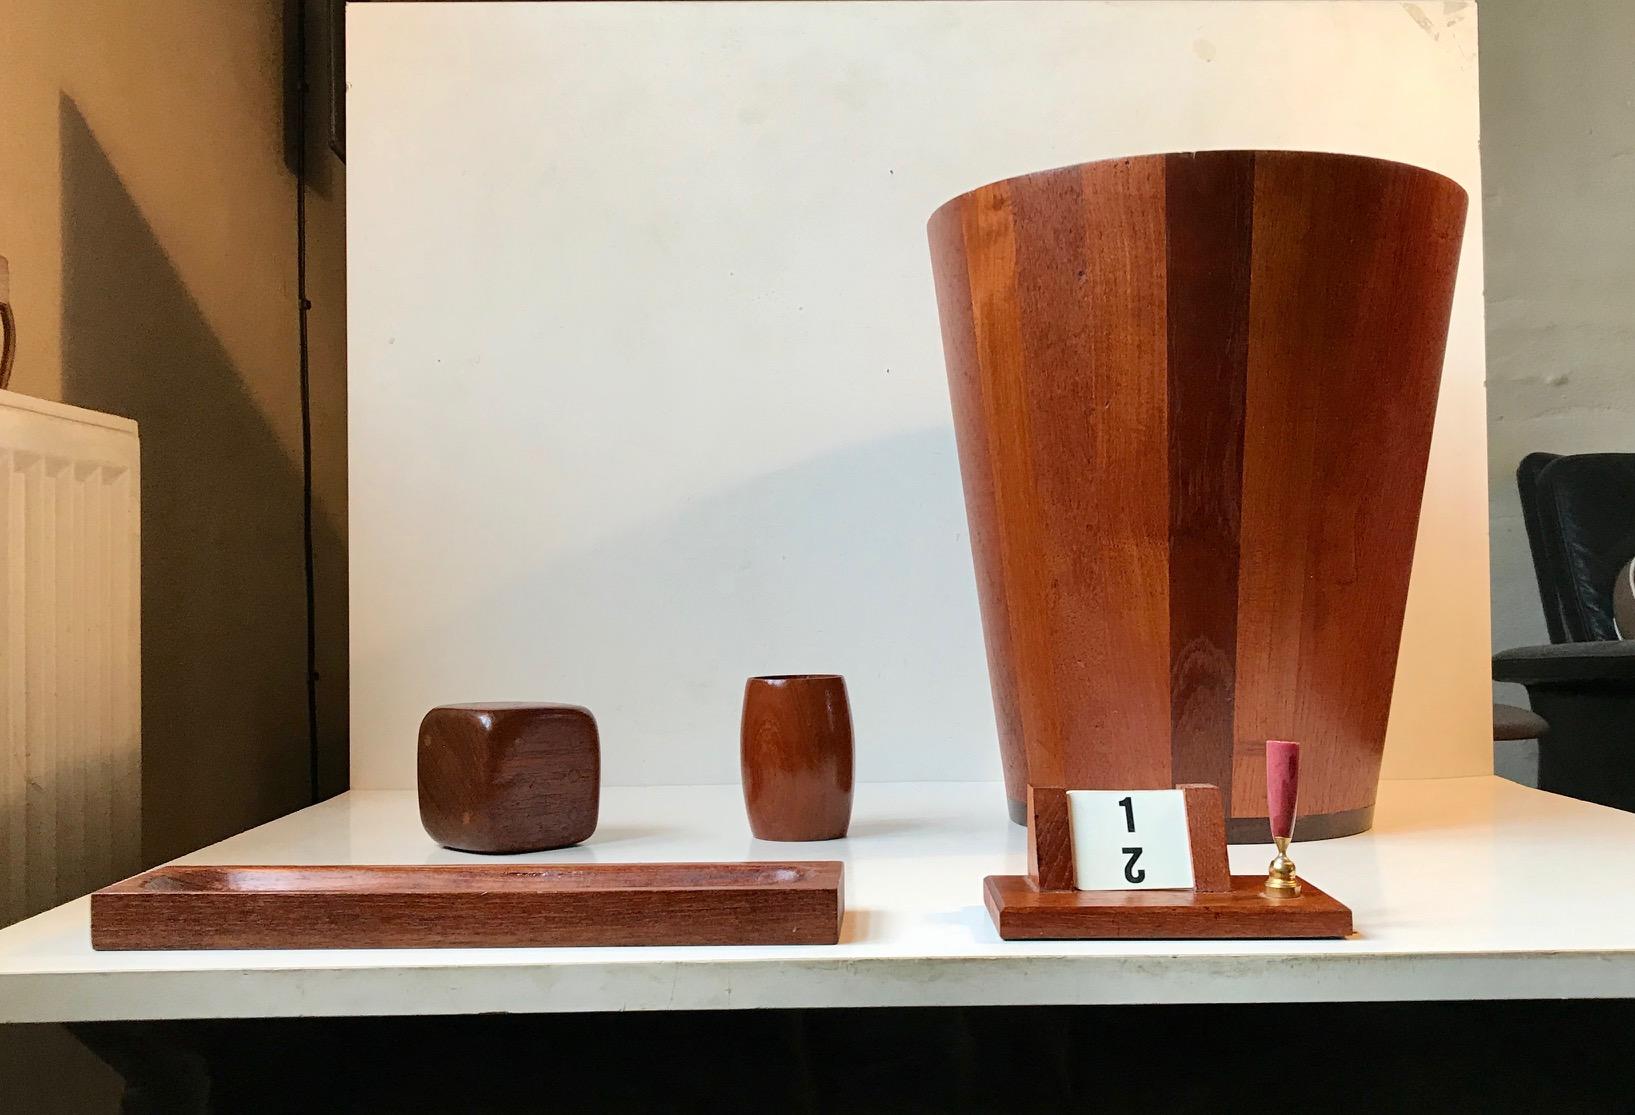 A set of desk/office accessories consisting of af solid stacked teak waste basket, a dice paperweight, pen tray, pen holder with calendar and a vase/container for clips etc. Manufactured from leftover teak from different Danish furniture makers